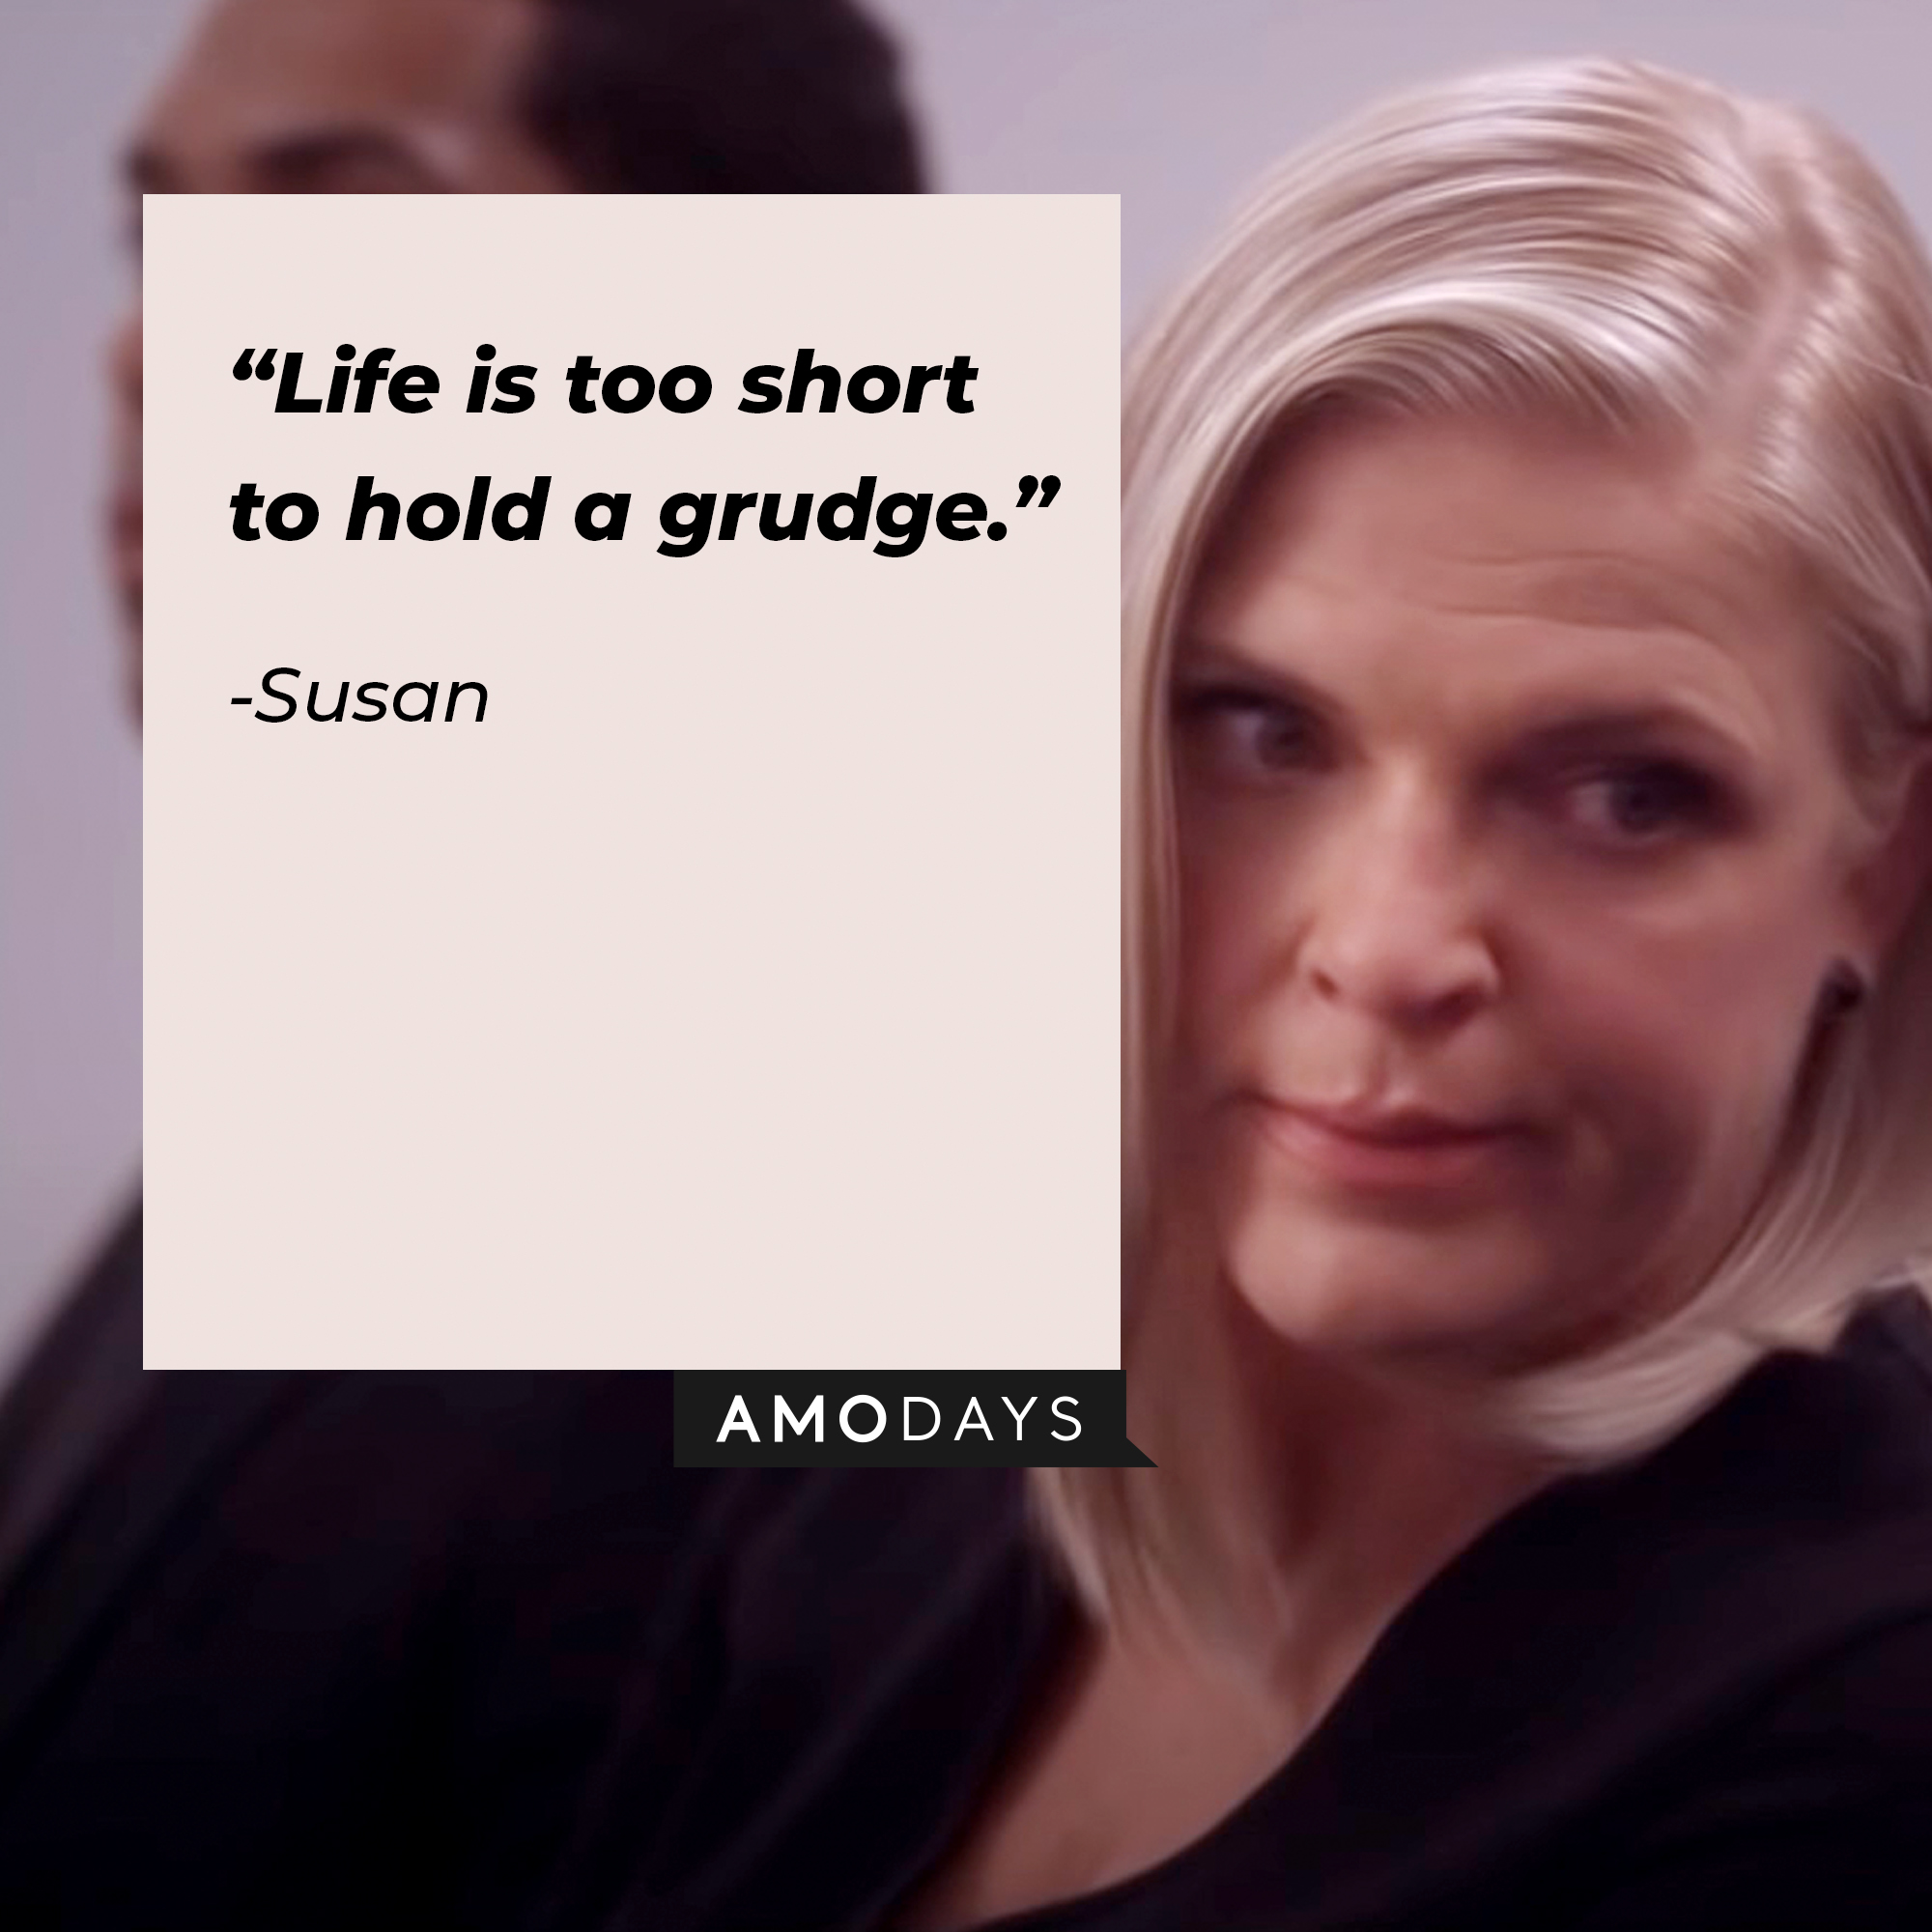 An image of Susan with her quote: “Life’s too short to hold a grudge.”  |  facebook.com/justlikethatmax